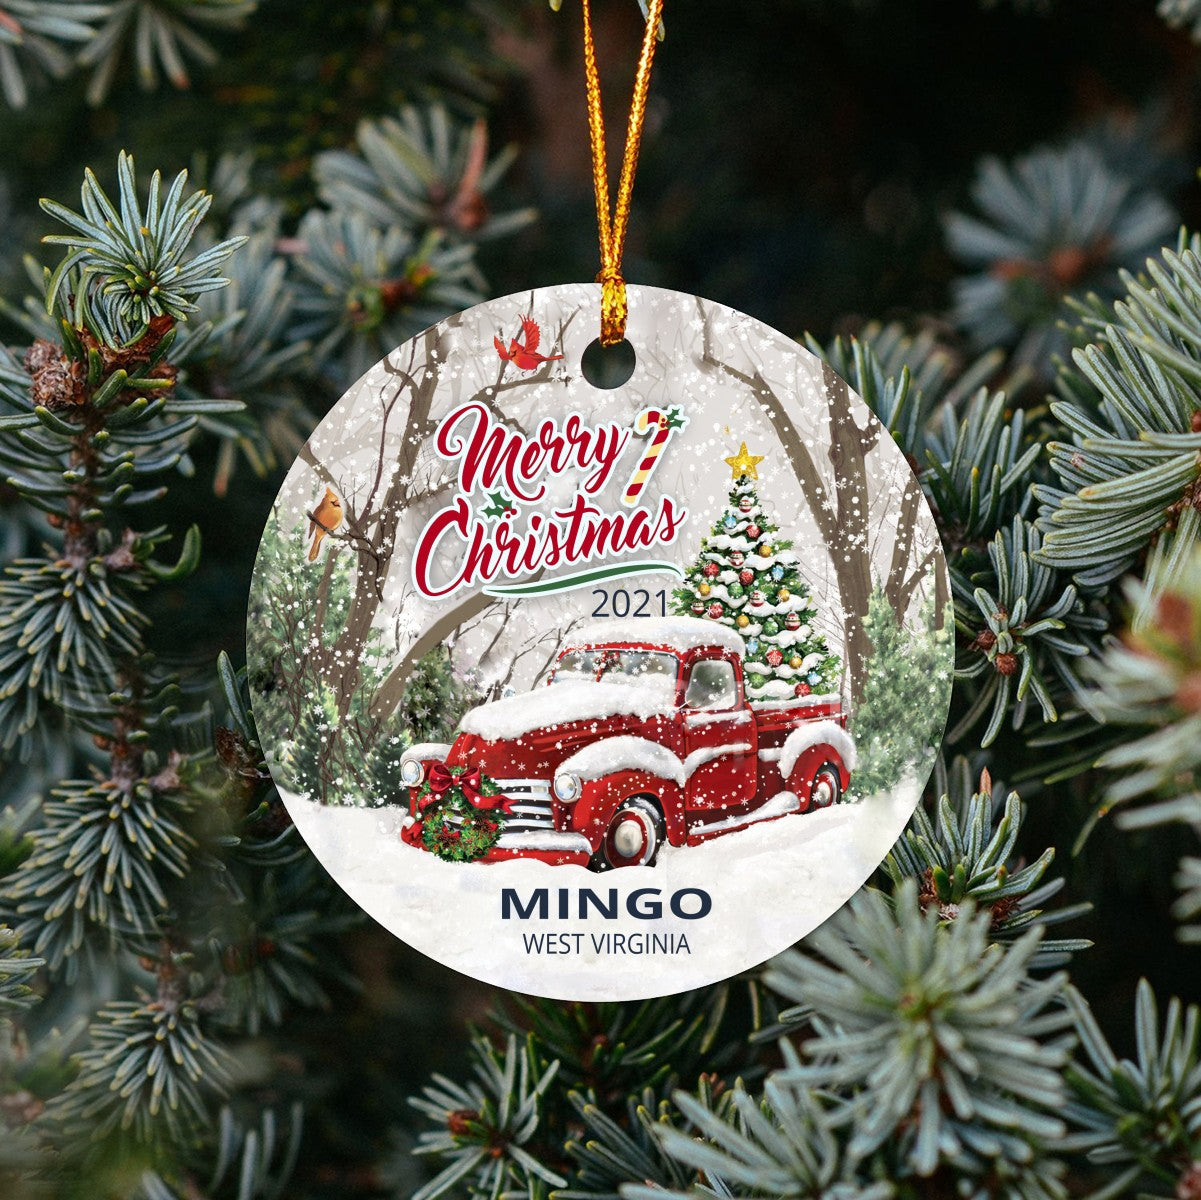 Christmas Tree Ornaments Mingo - Ornament With Name City, State Mingo West Virginia WV Ornament - Red Truck Xmas Ornaments 3'' Plastic Gift For Family, Friend And Housewarming